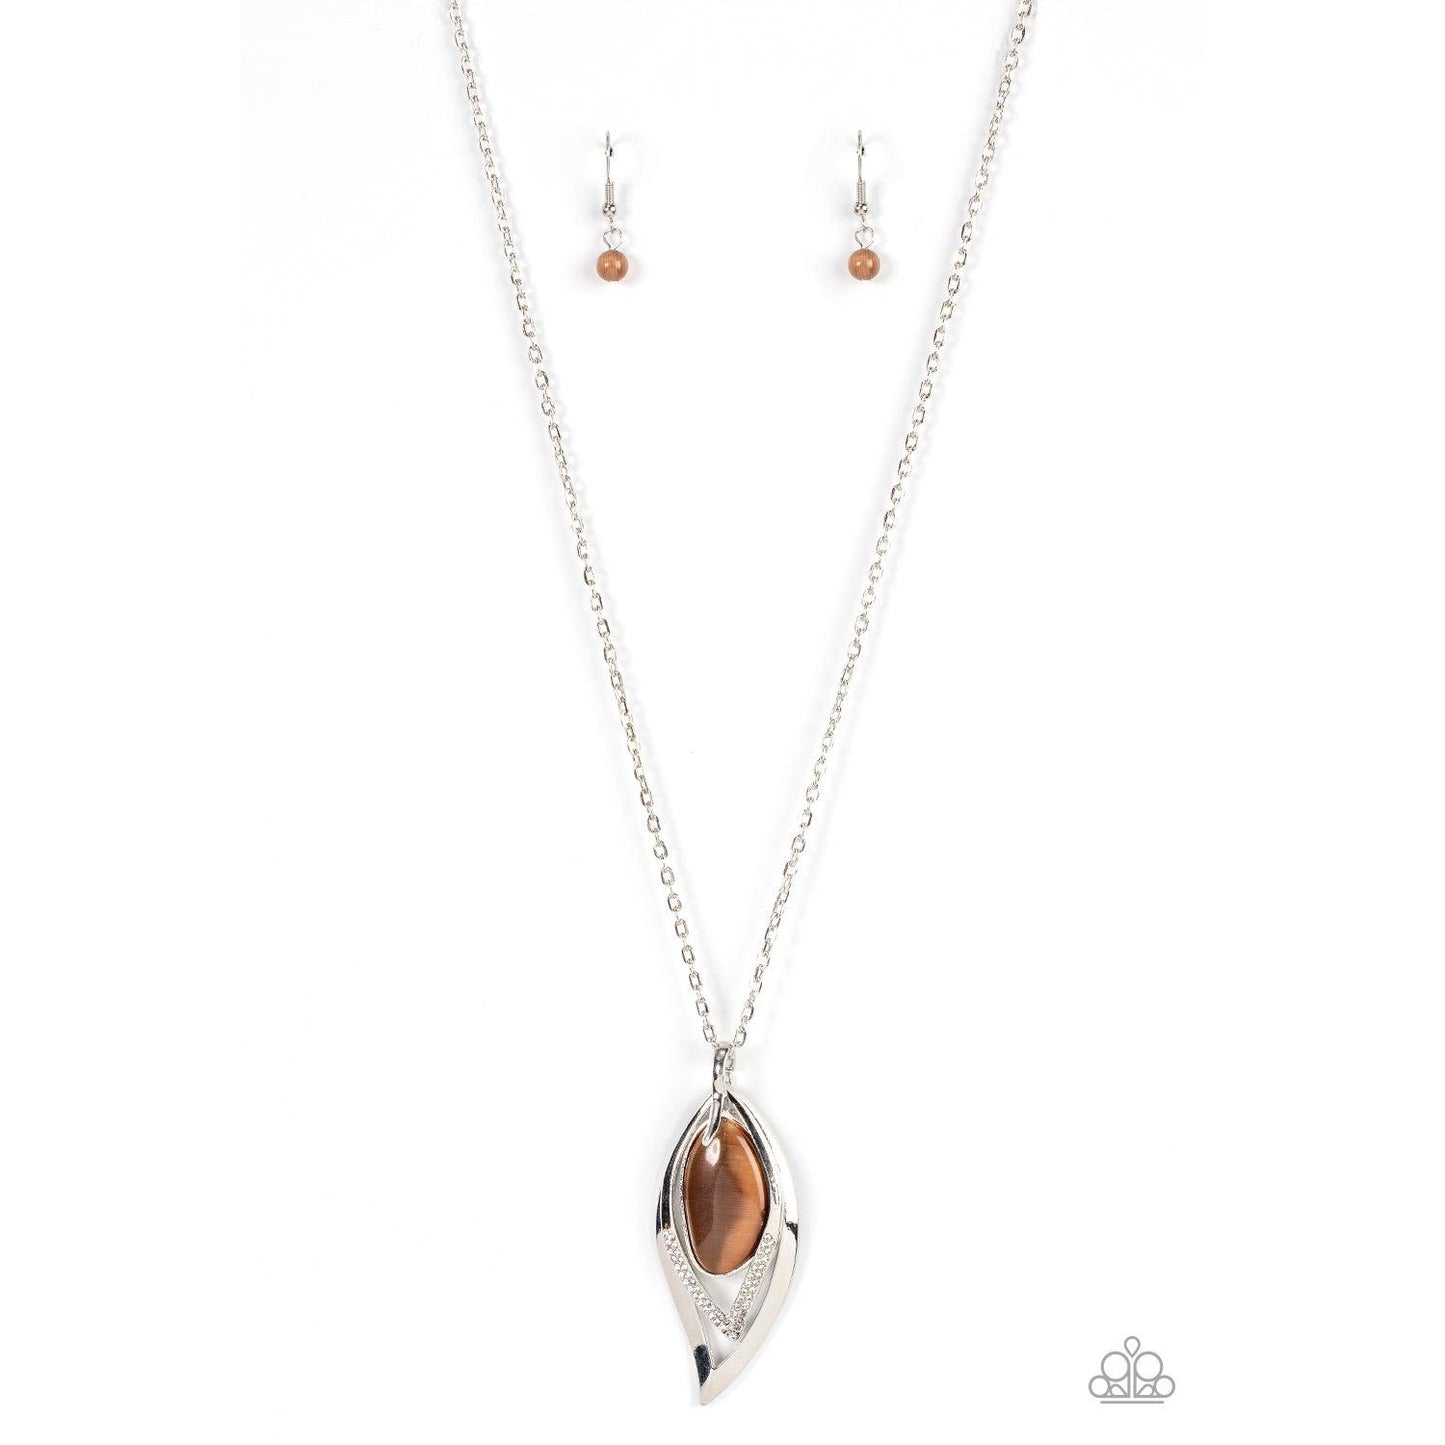 Magical Meadow - Brown Moonstone Necklace - Bling by Danielle Baker